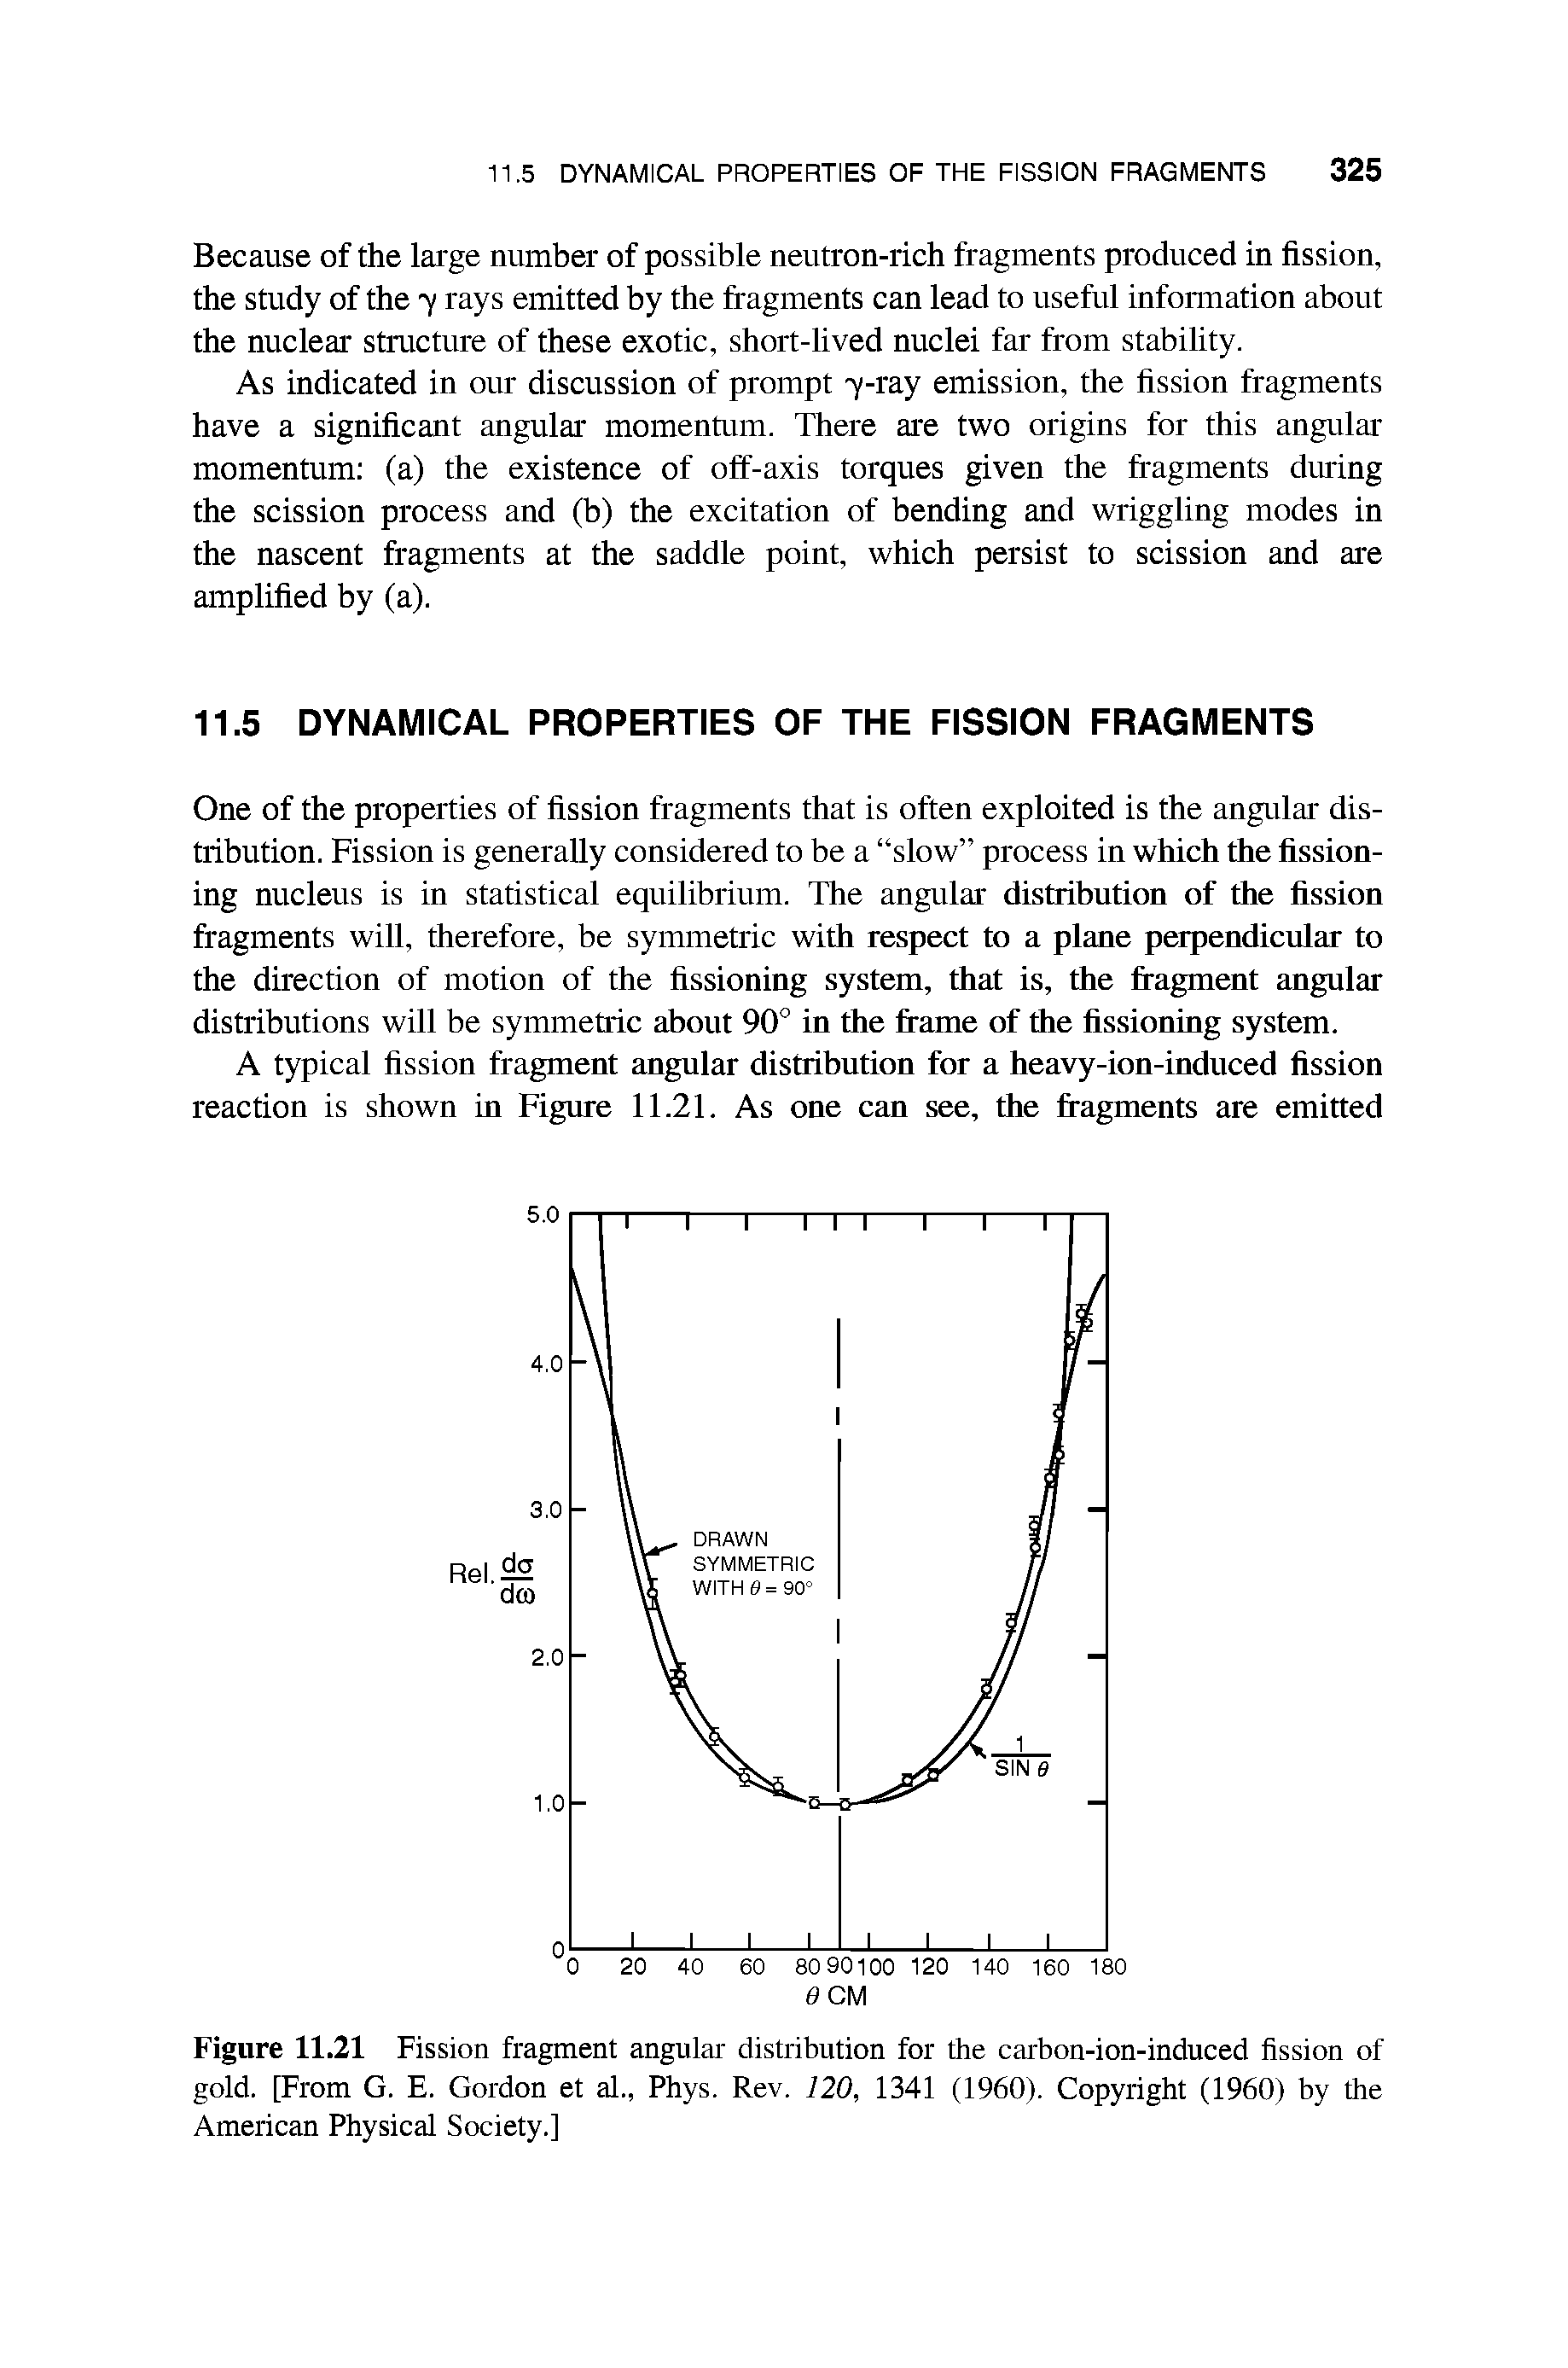 Figure 11.21 Fission fragment angular distribution for the carbon-ion-induced fission of gold. [From G. E. Gordon et al., Phys. Rev. 120, 1341 (1960). Copyright (1960) by the American Physical Society.]...